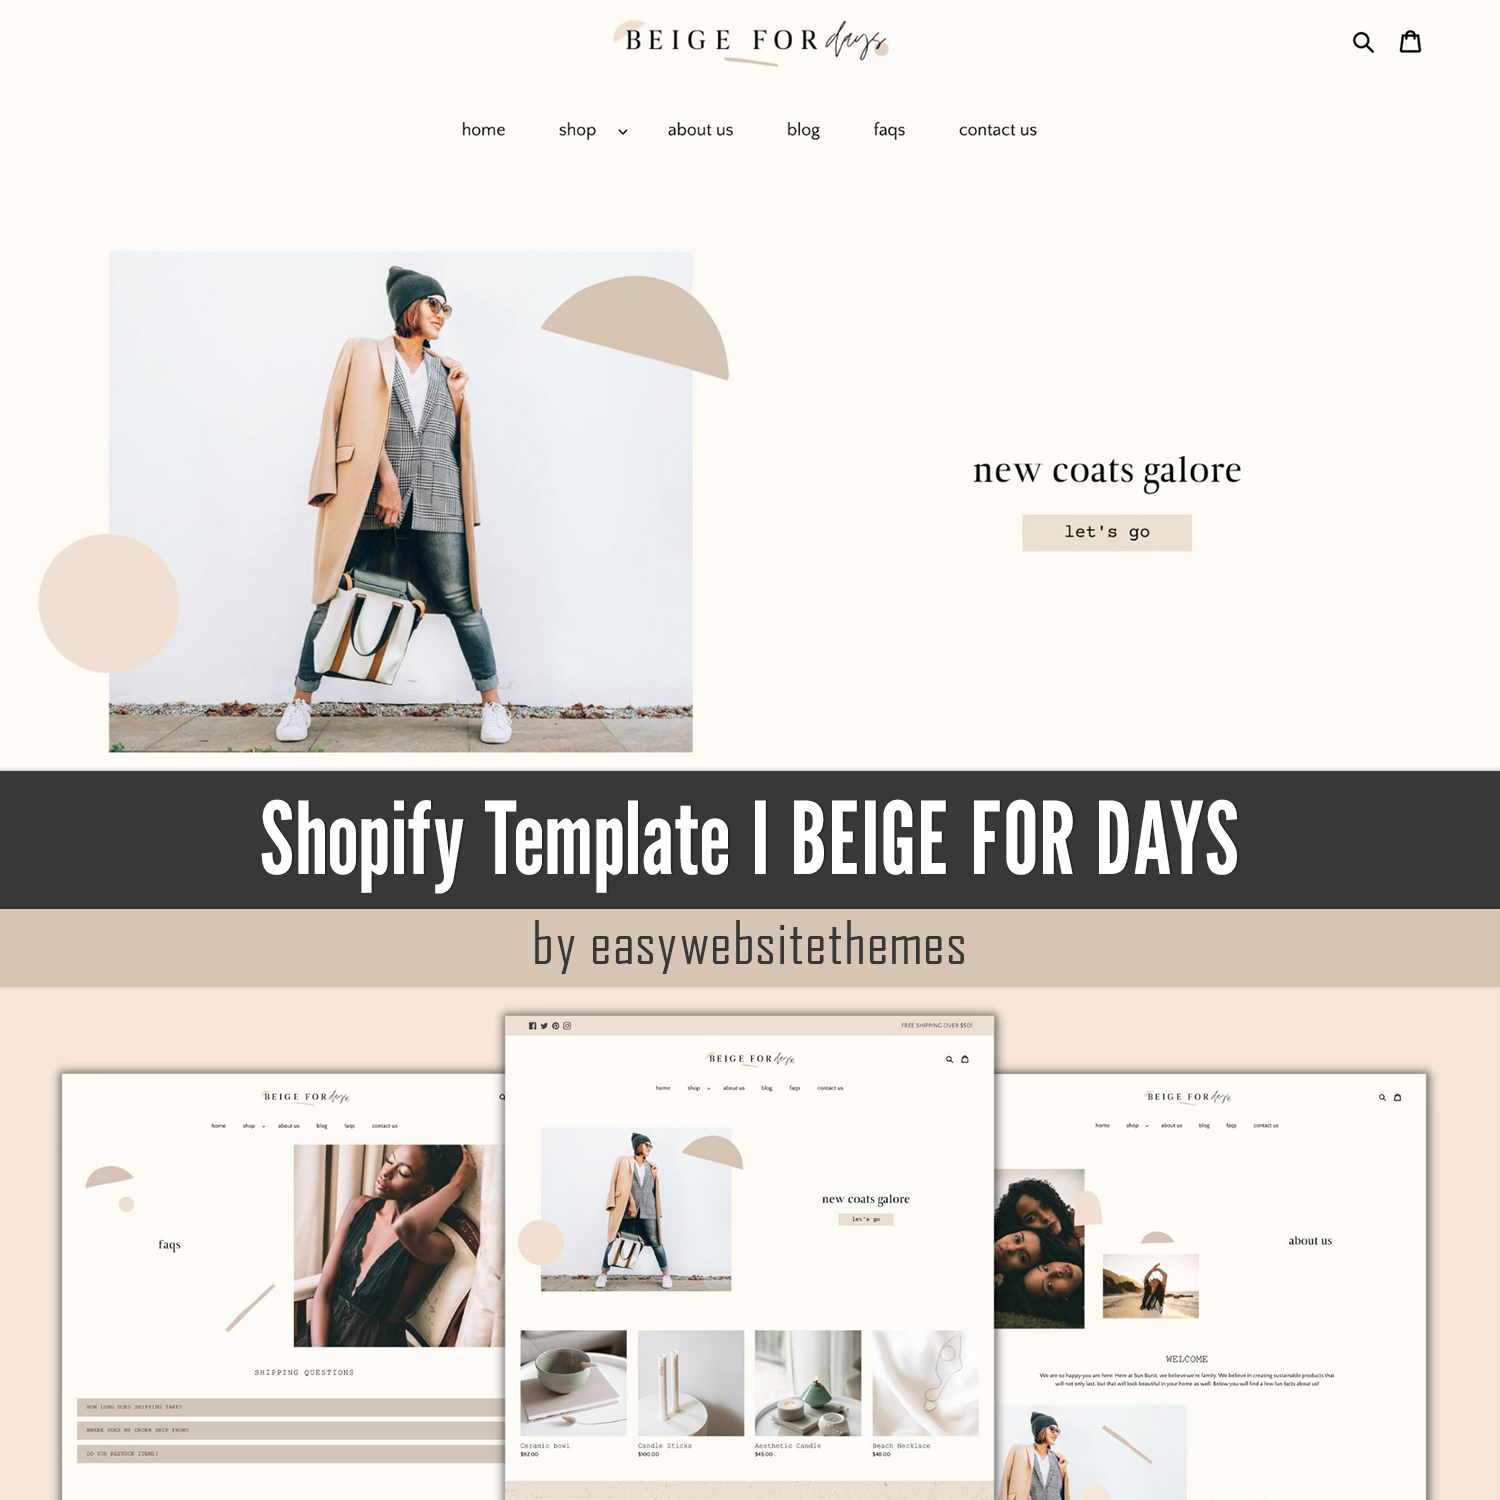 Shopify Template I BEIGE FOR DAYS.